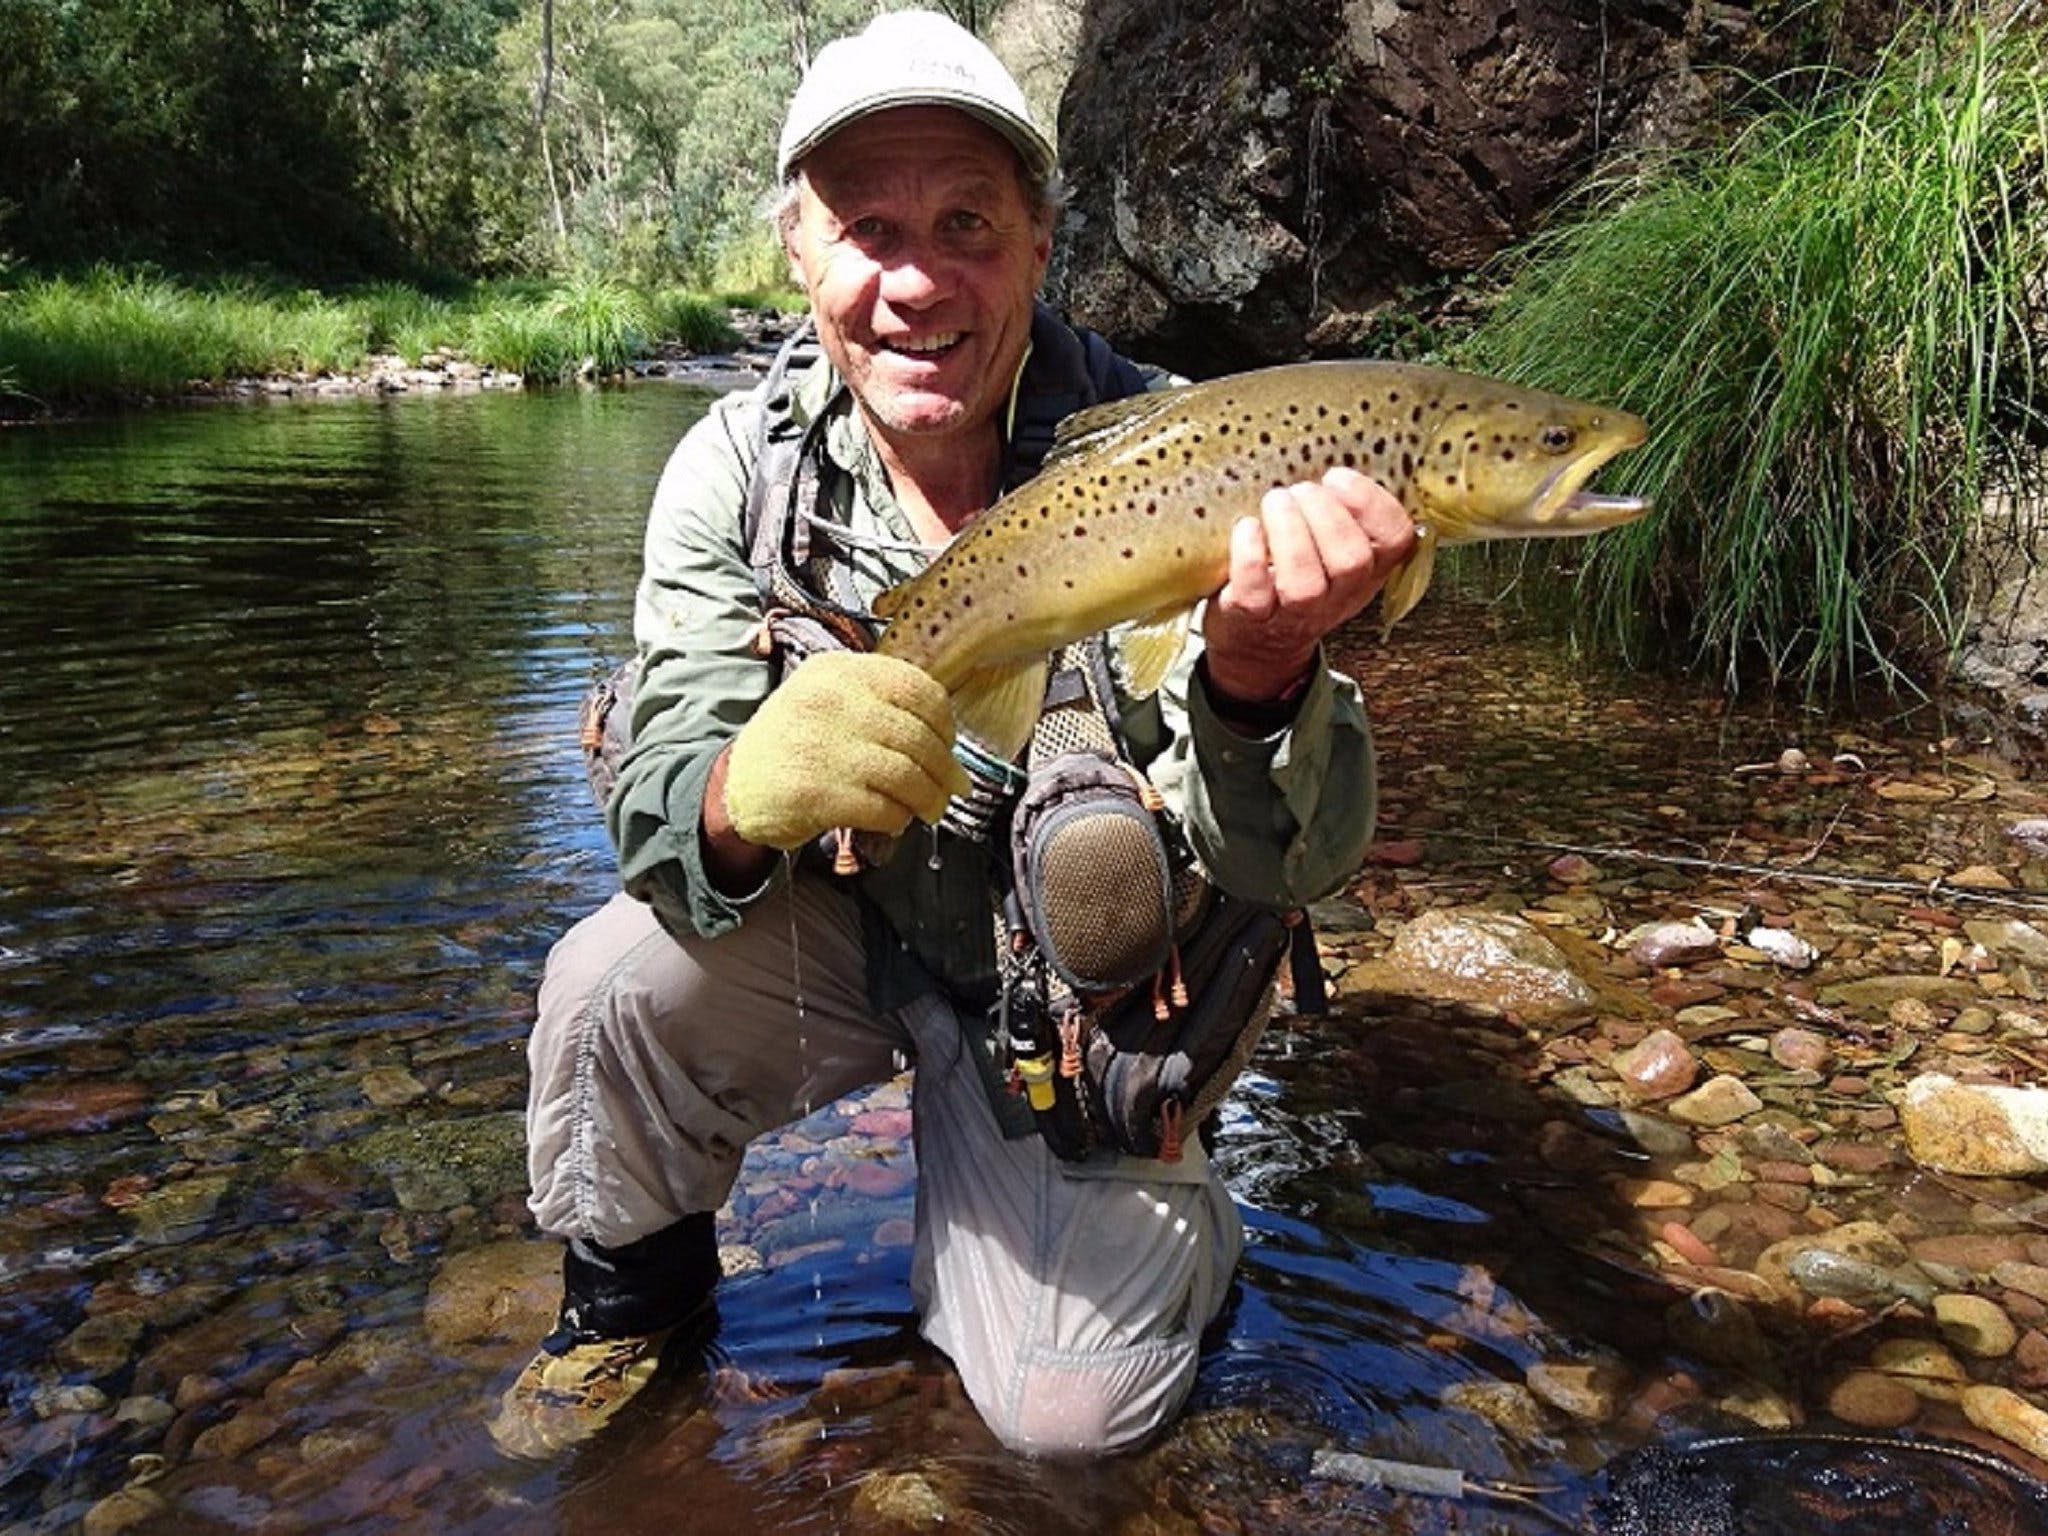 Victoria and Tasmania Fishing Monthly August 2019 by Fishing